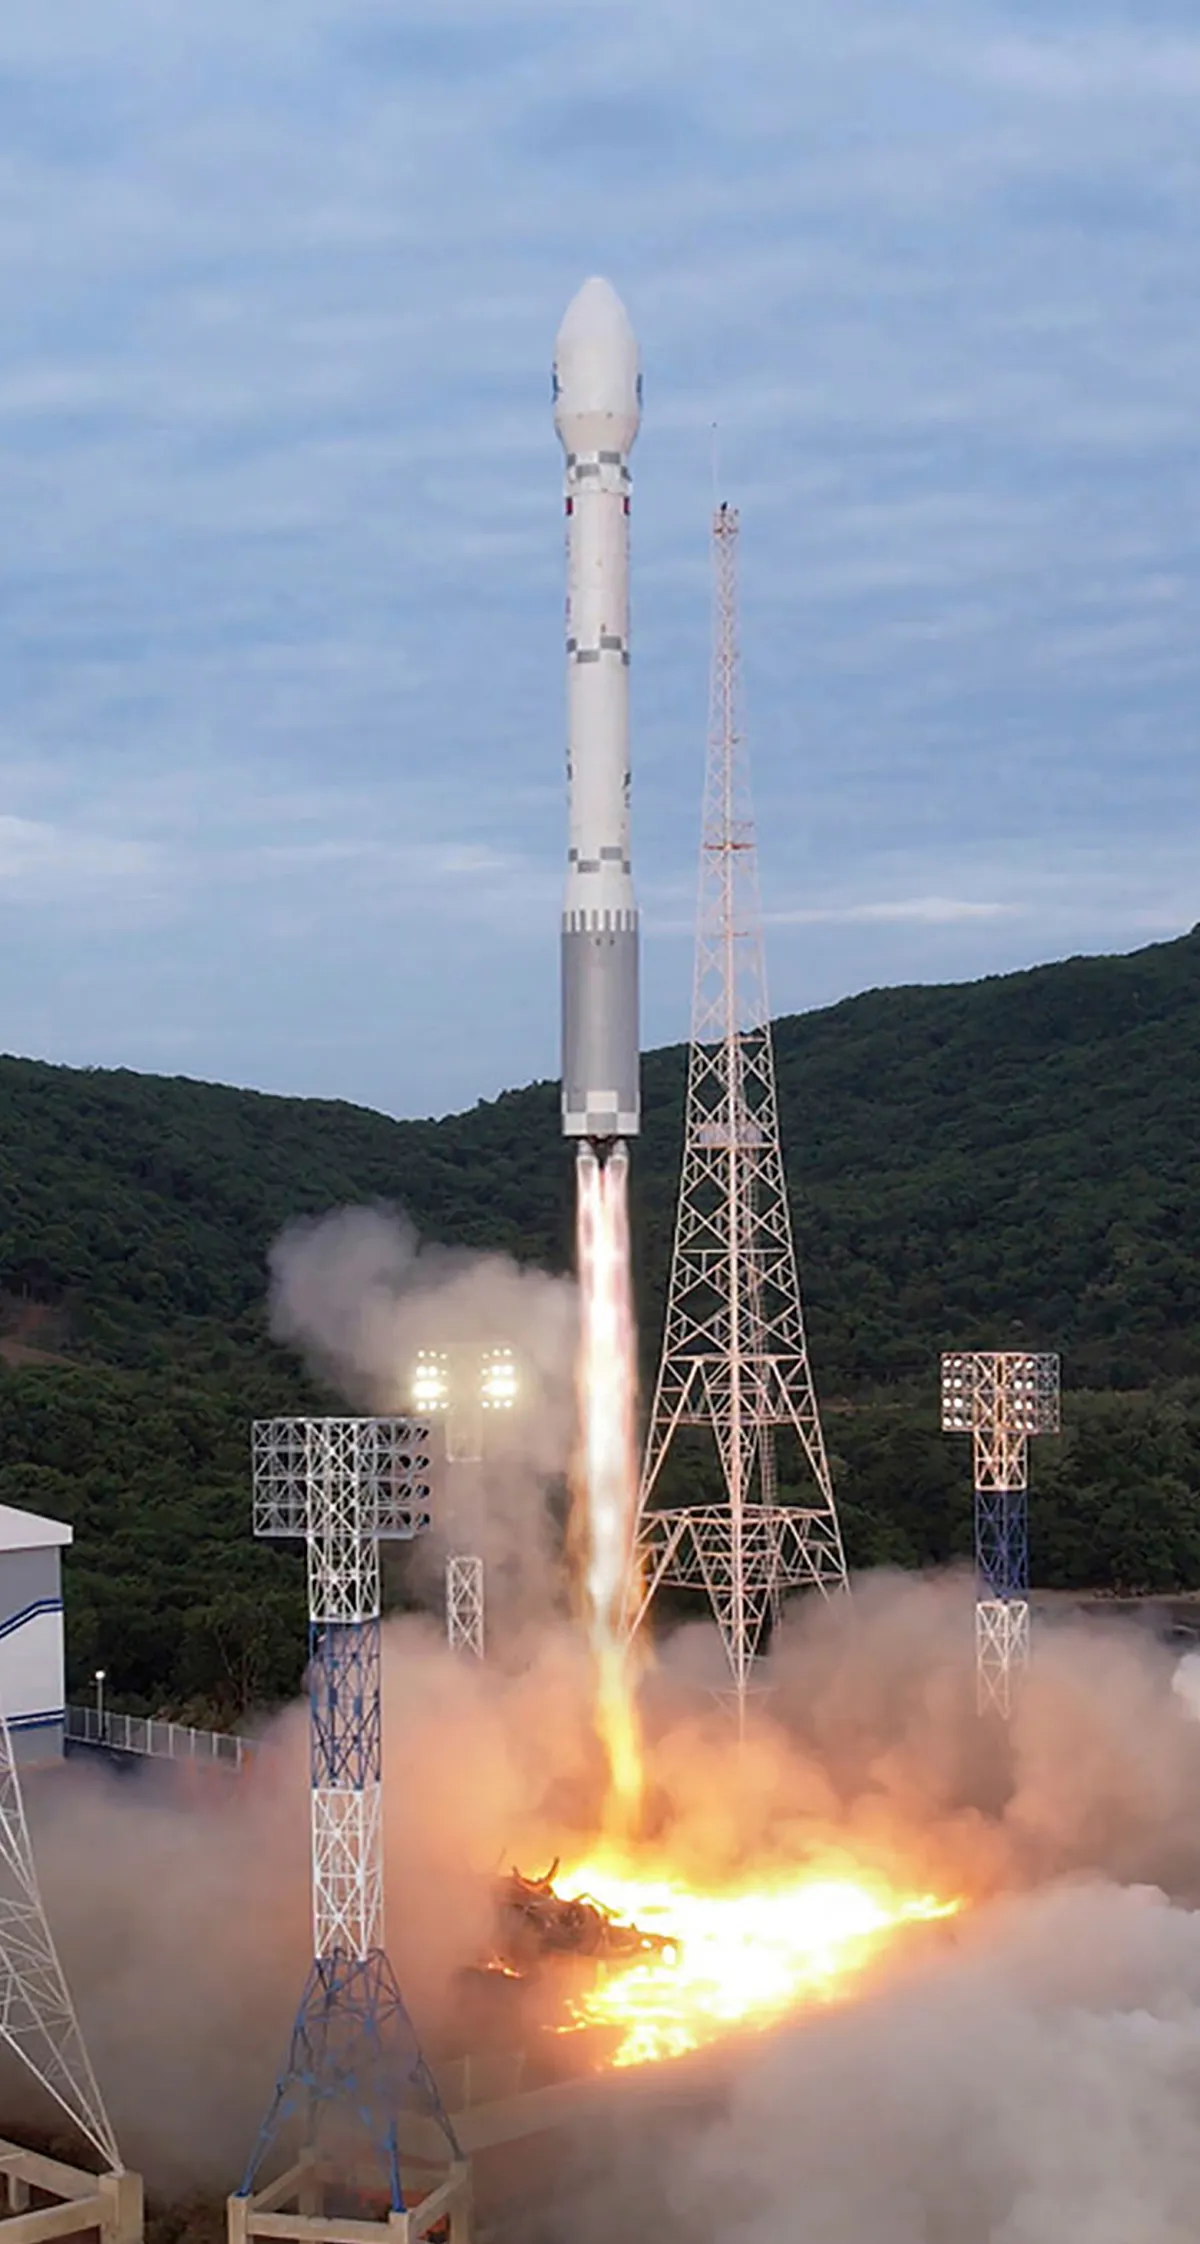 Chŏllima-1 lifting off from its launch pad at the Sohae Satellite Launching Station.